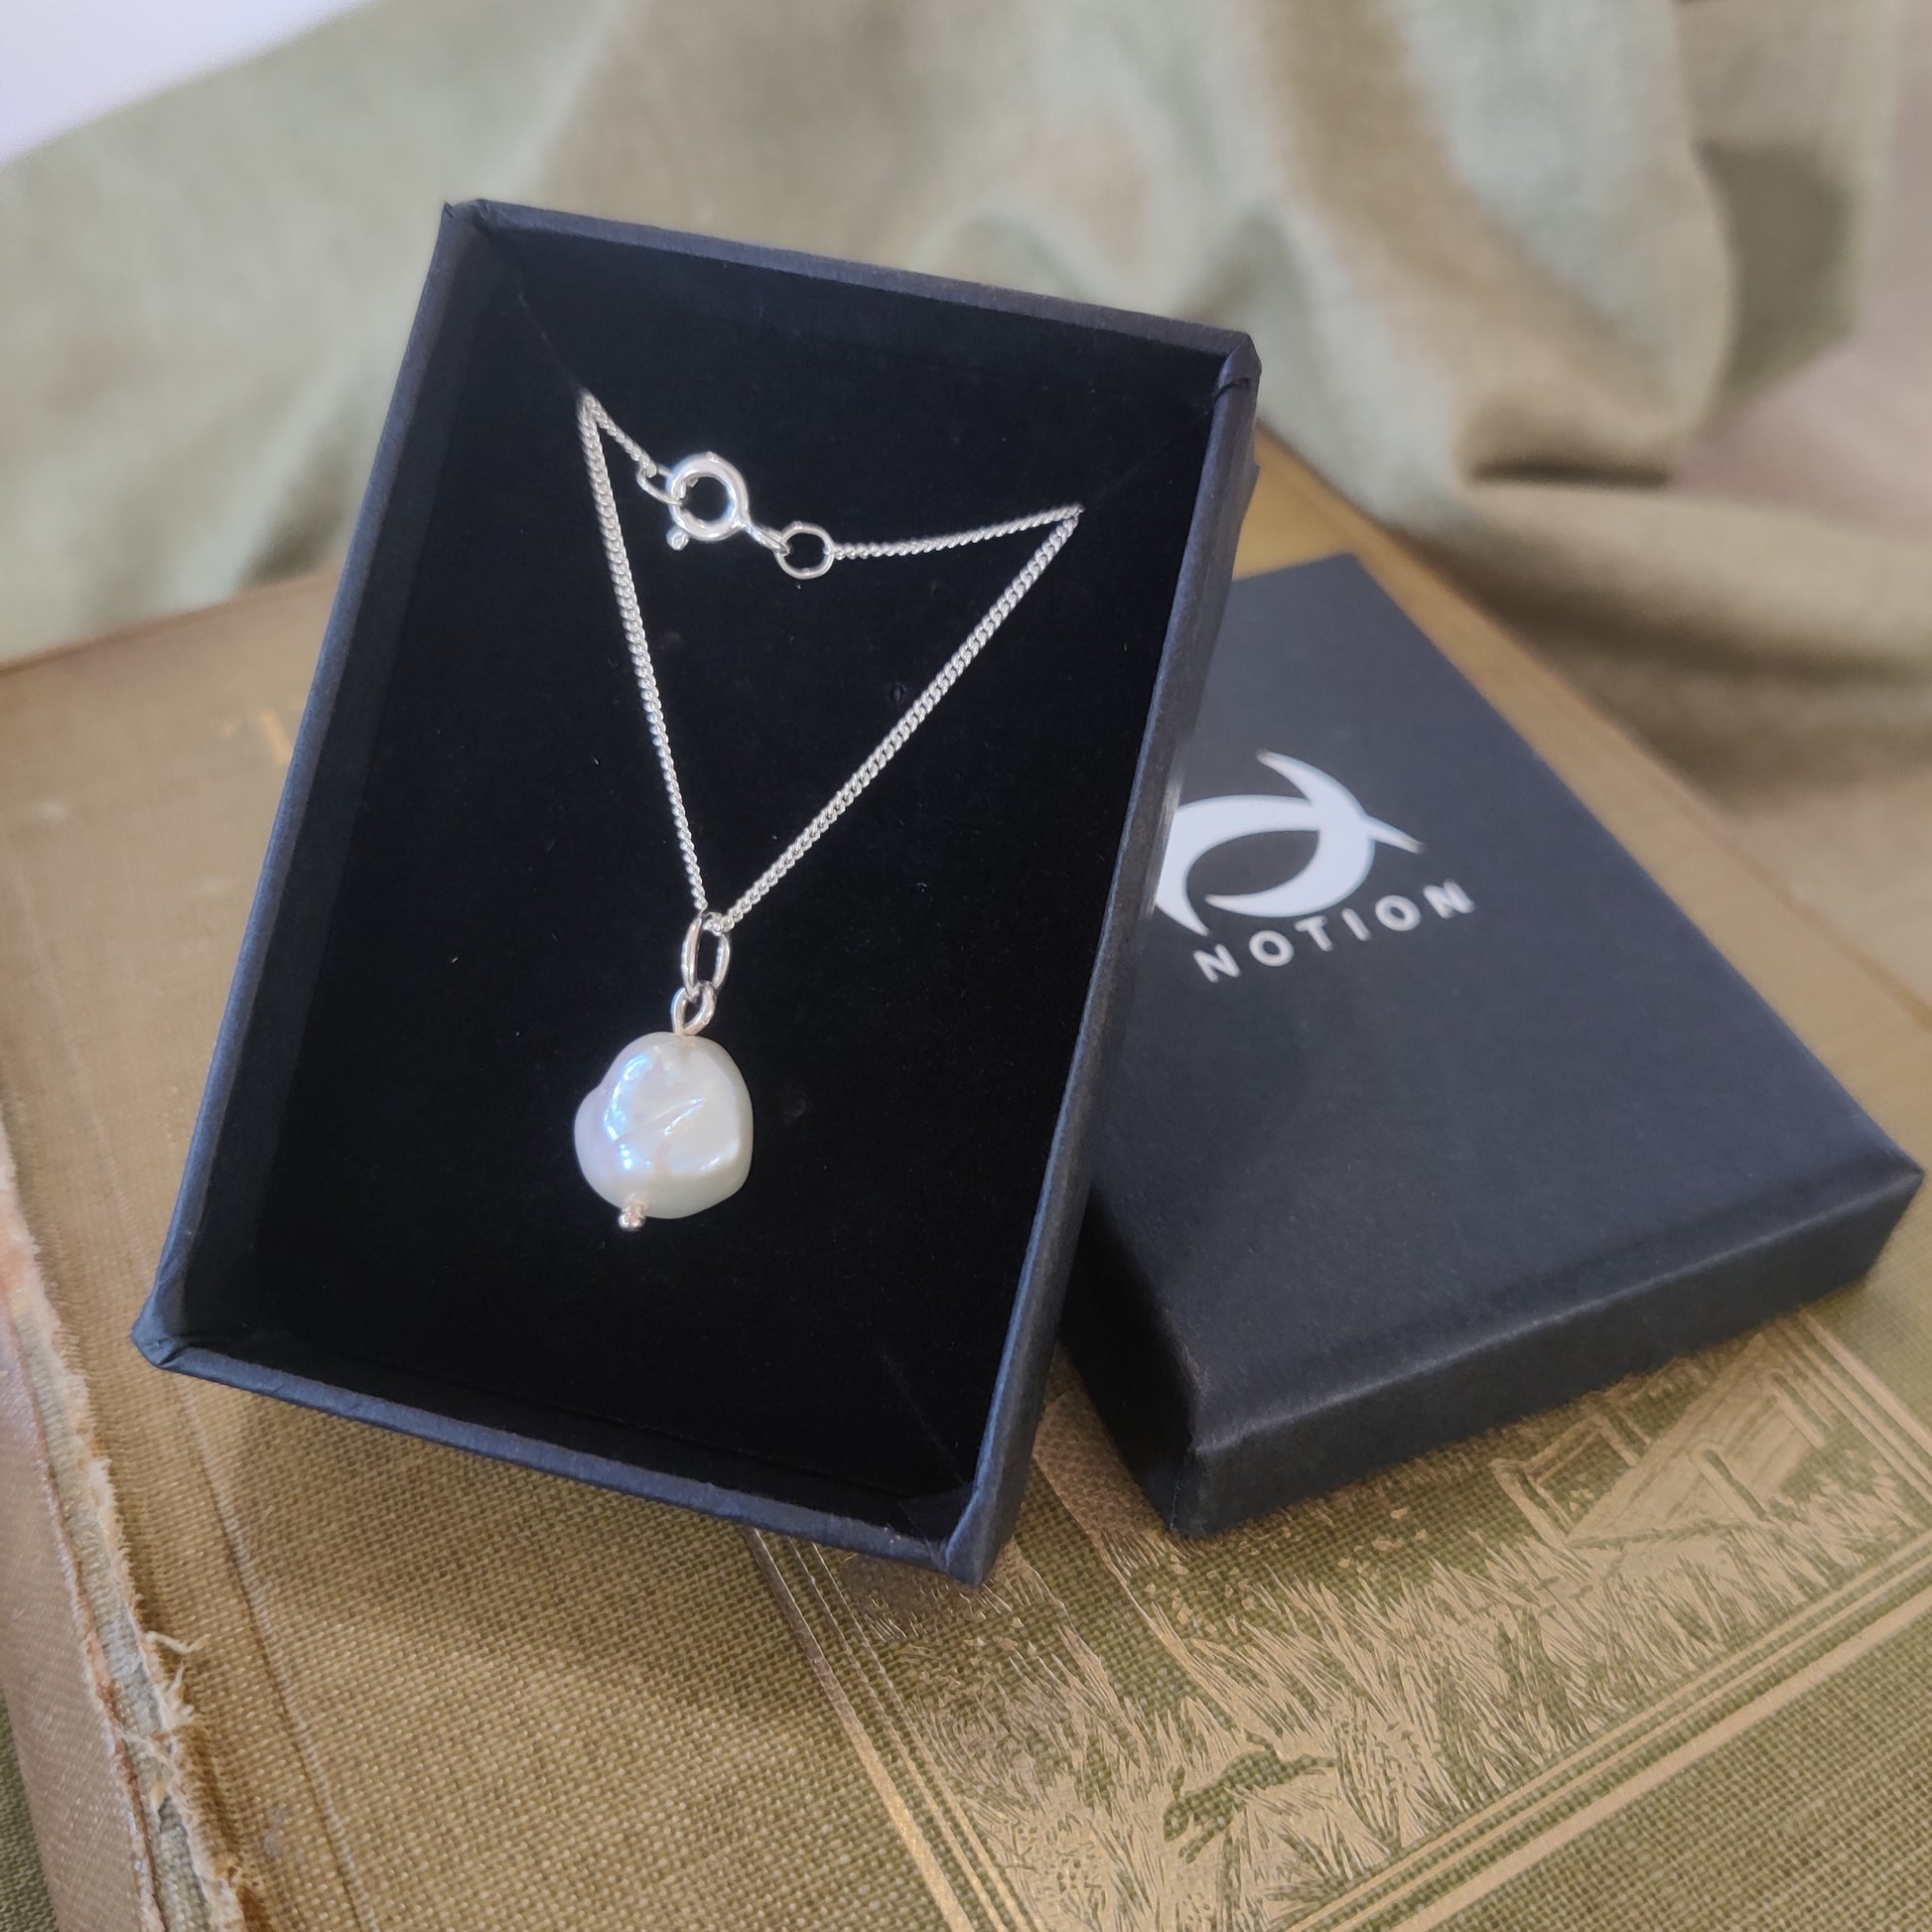 Baroque large pearl necklace in a gift box by Notion Jewellery